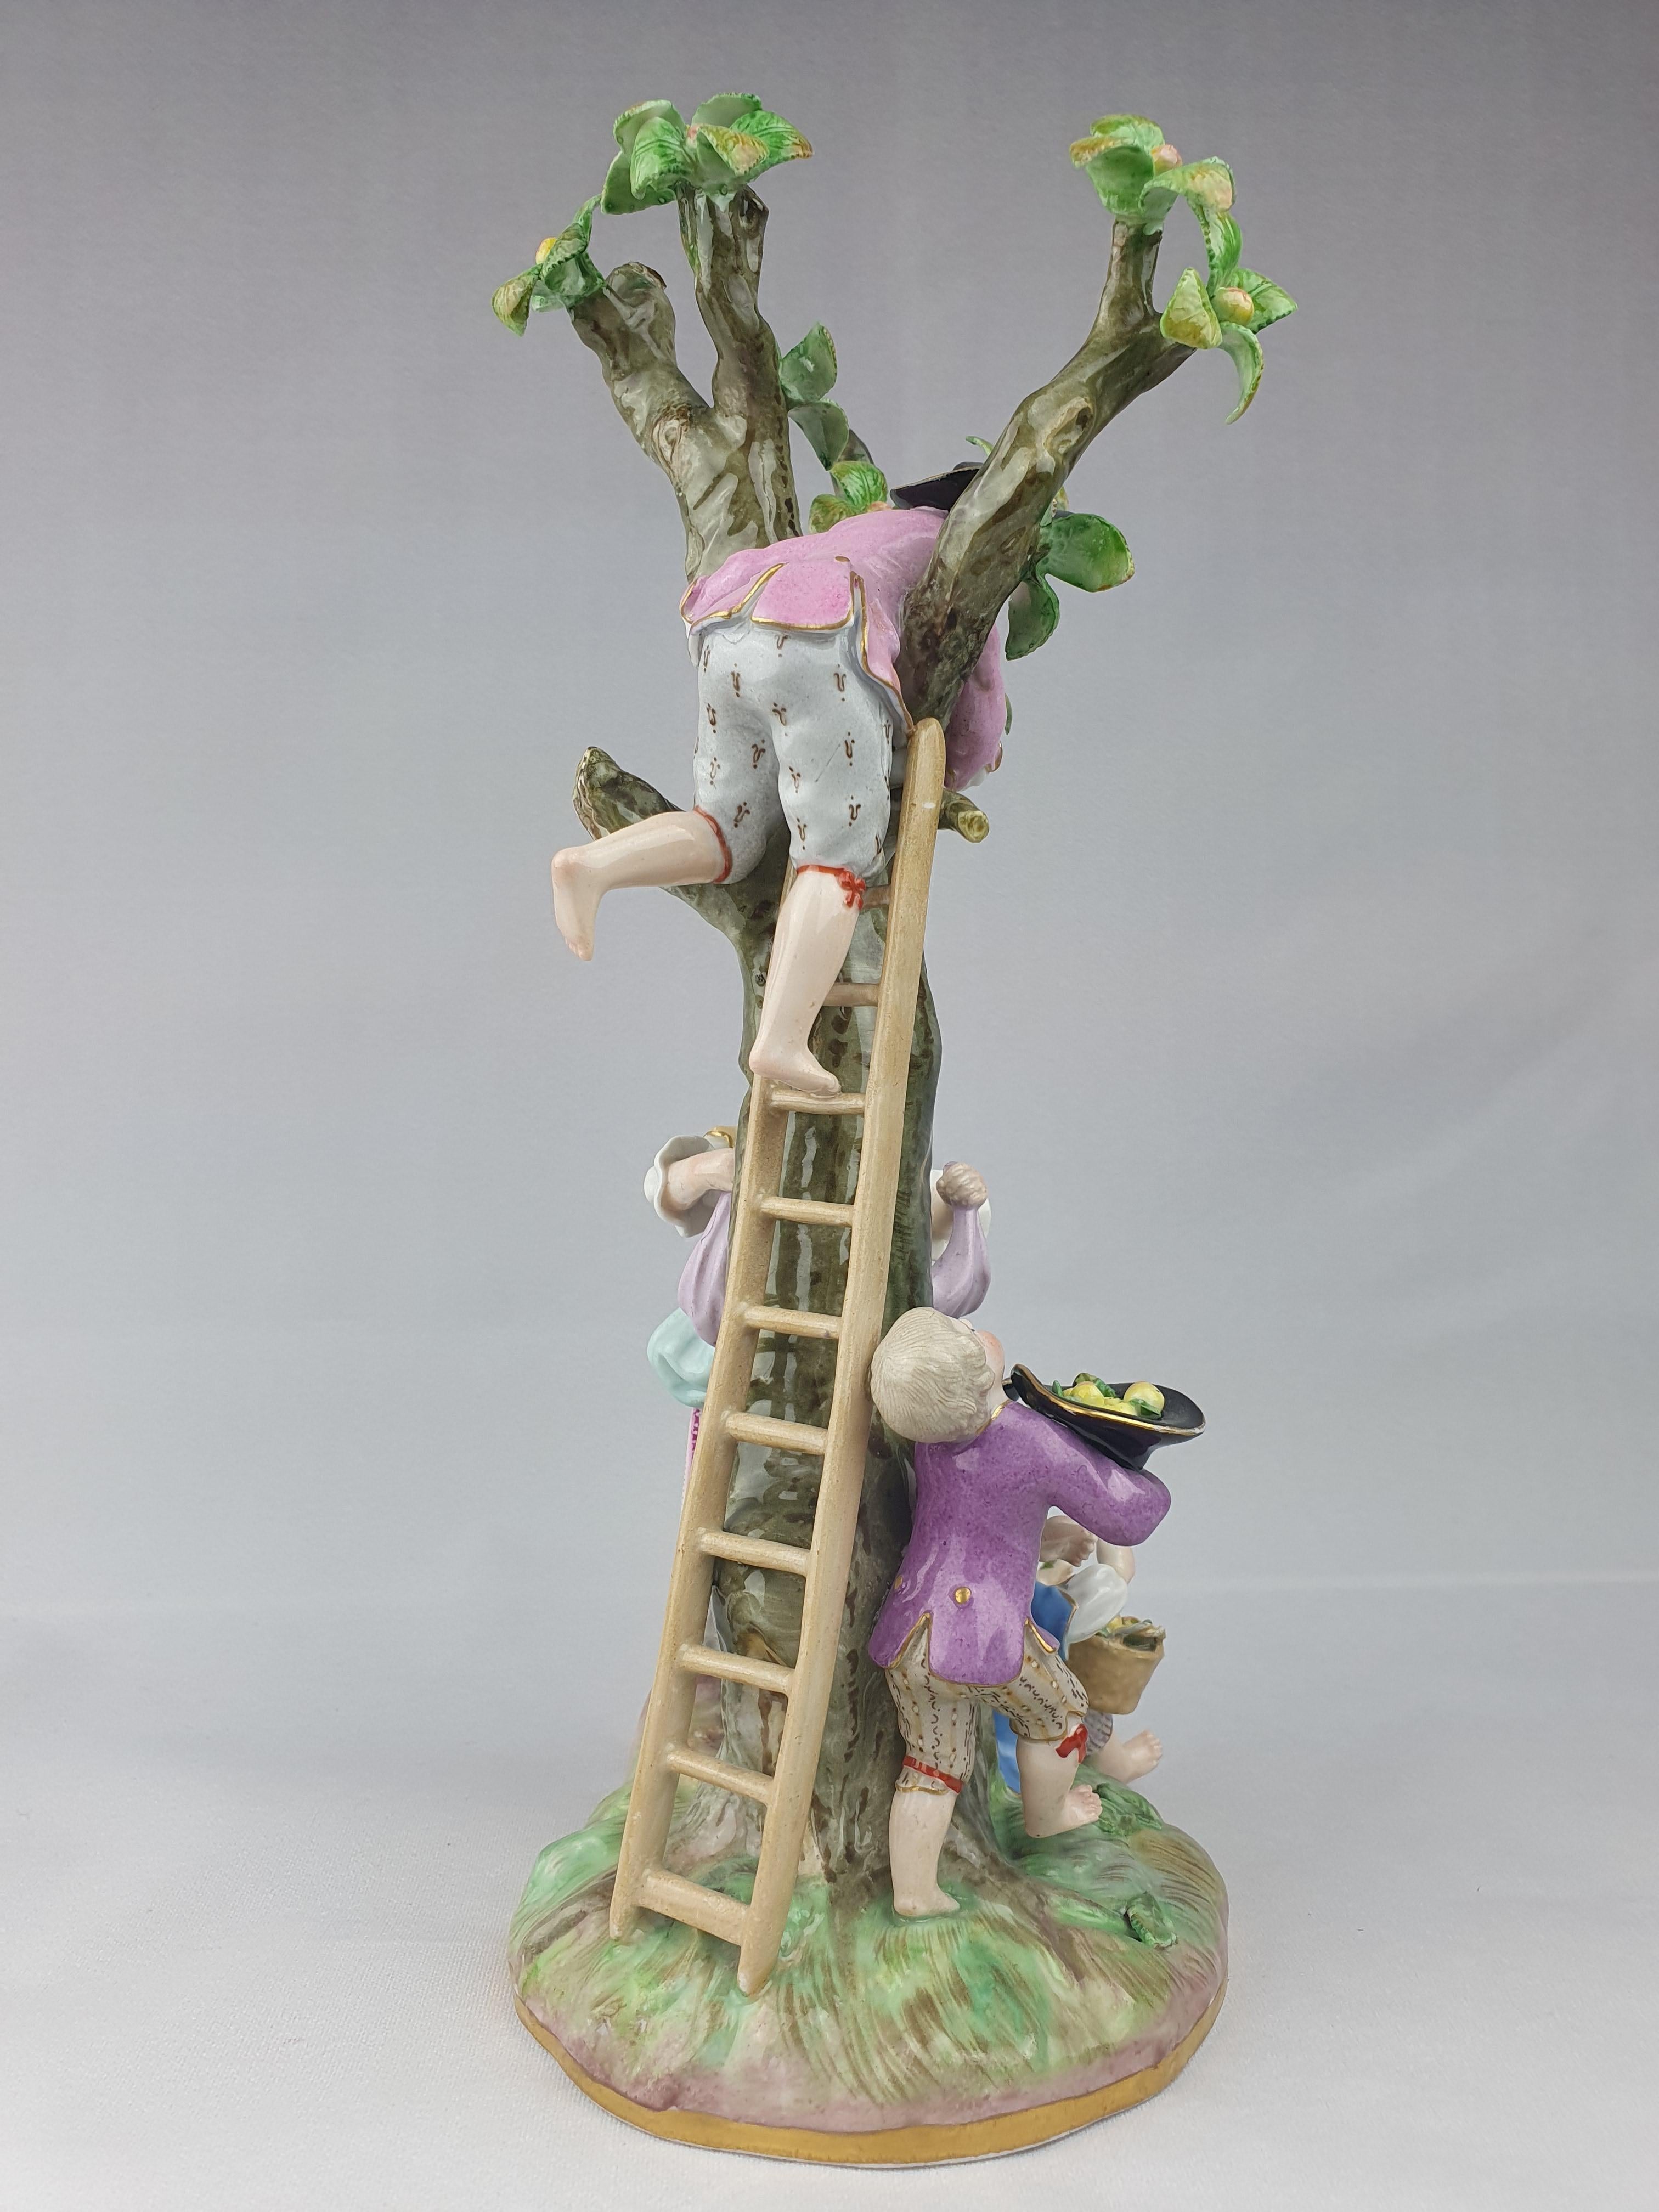 Meissen Porcelain Figure group of Apple Pickers late 19th Century after a model by J.J. Kaendler and F.E. Meyer of 1751 depicted as a maiden and three young boys climbing a ladder and gathering fruit from an apple tree.

Underglaze blue crossed